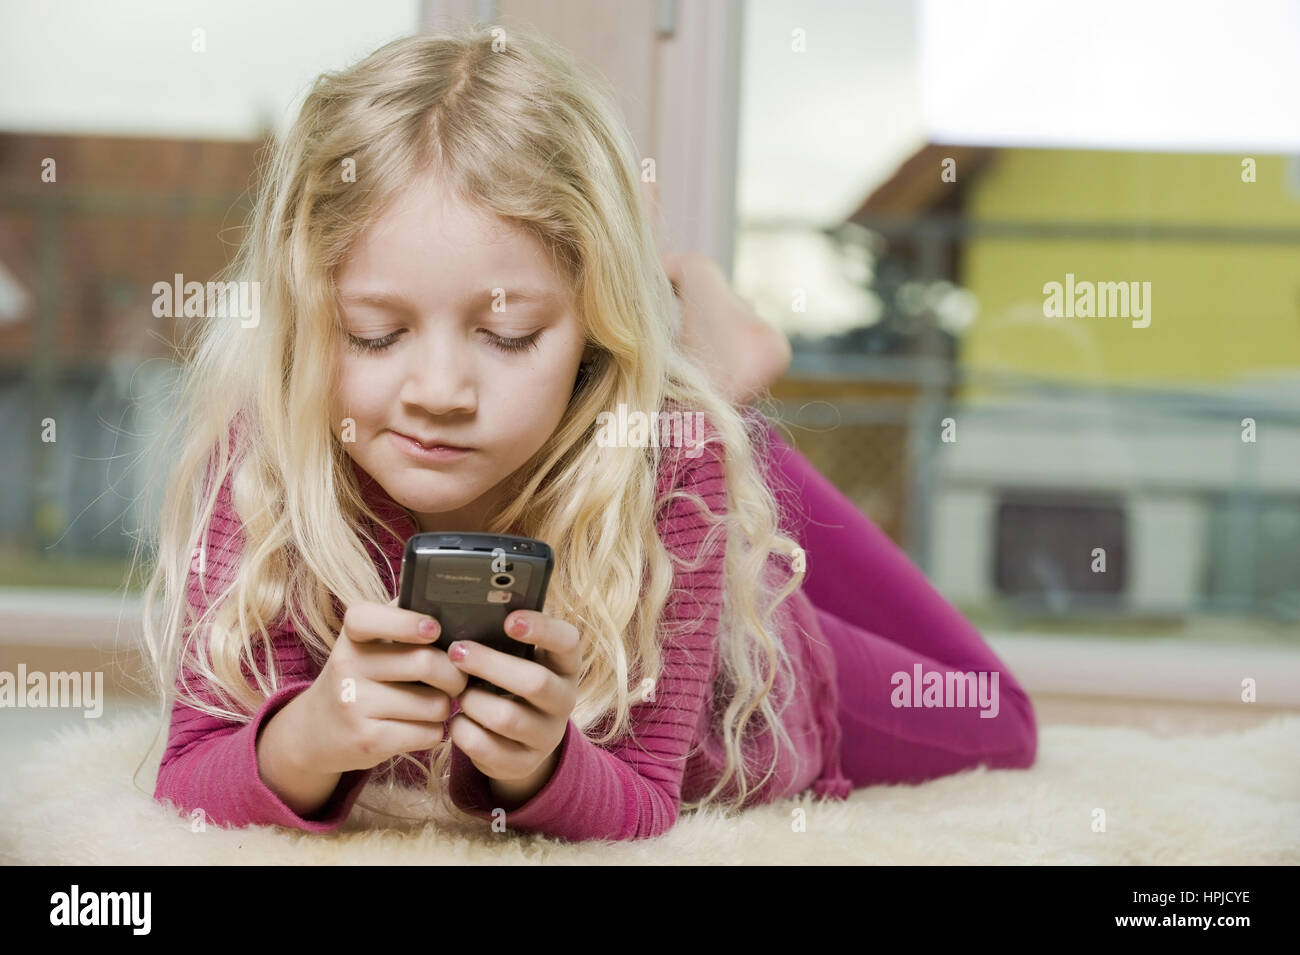 Model released , Maedchen liegt mit Handy am Fussboden - girl with mobile phone Stock Photo